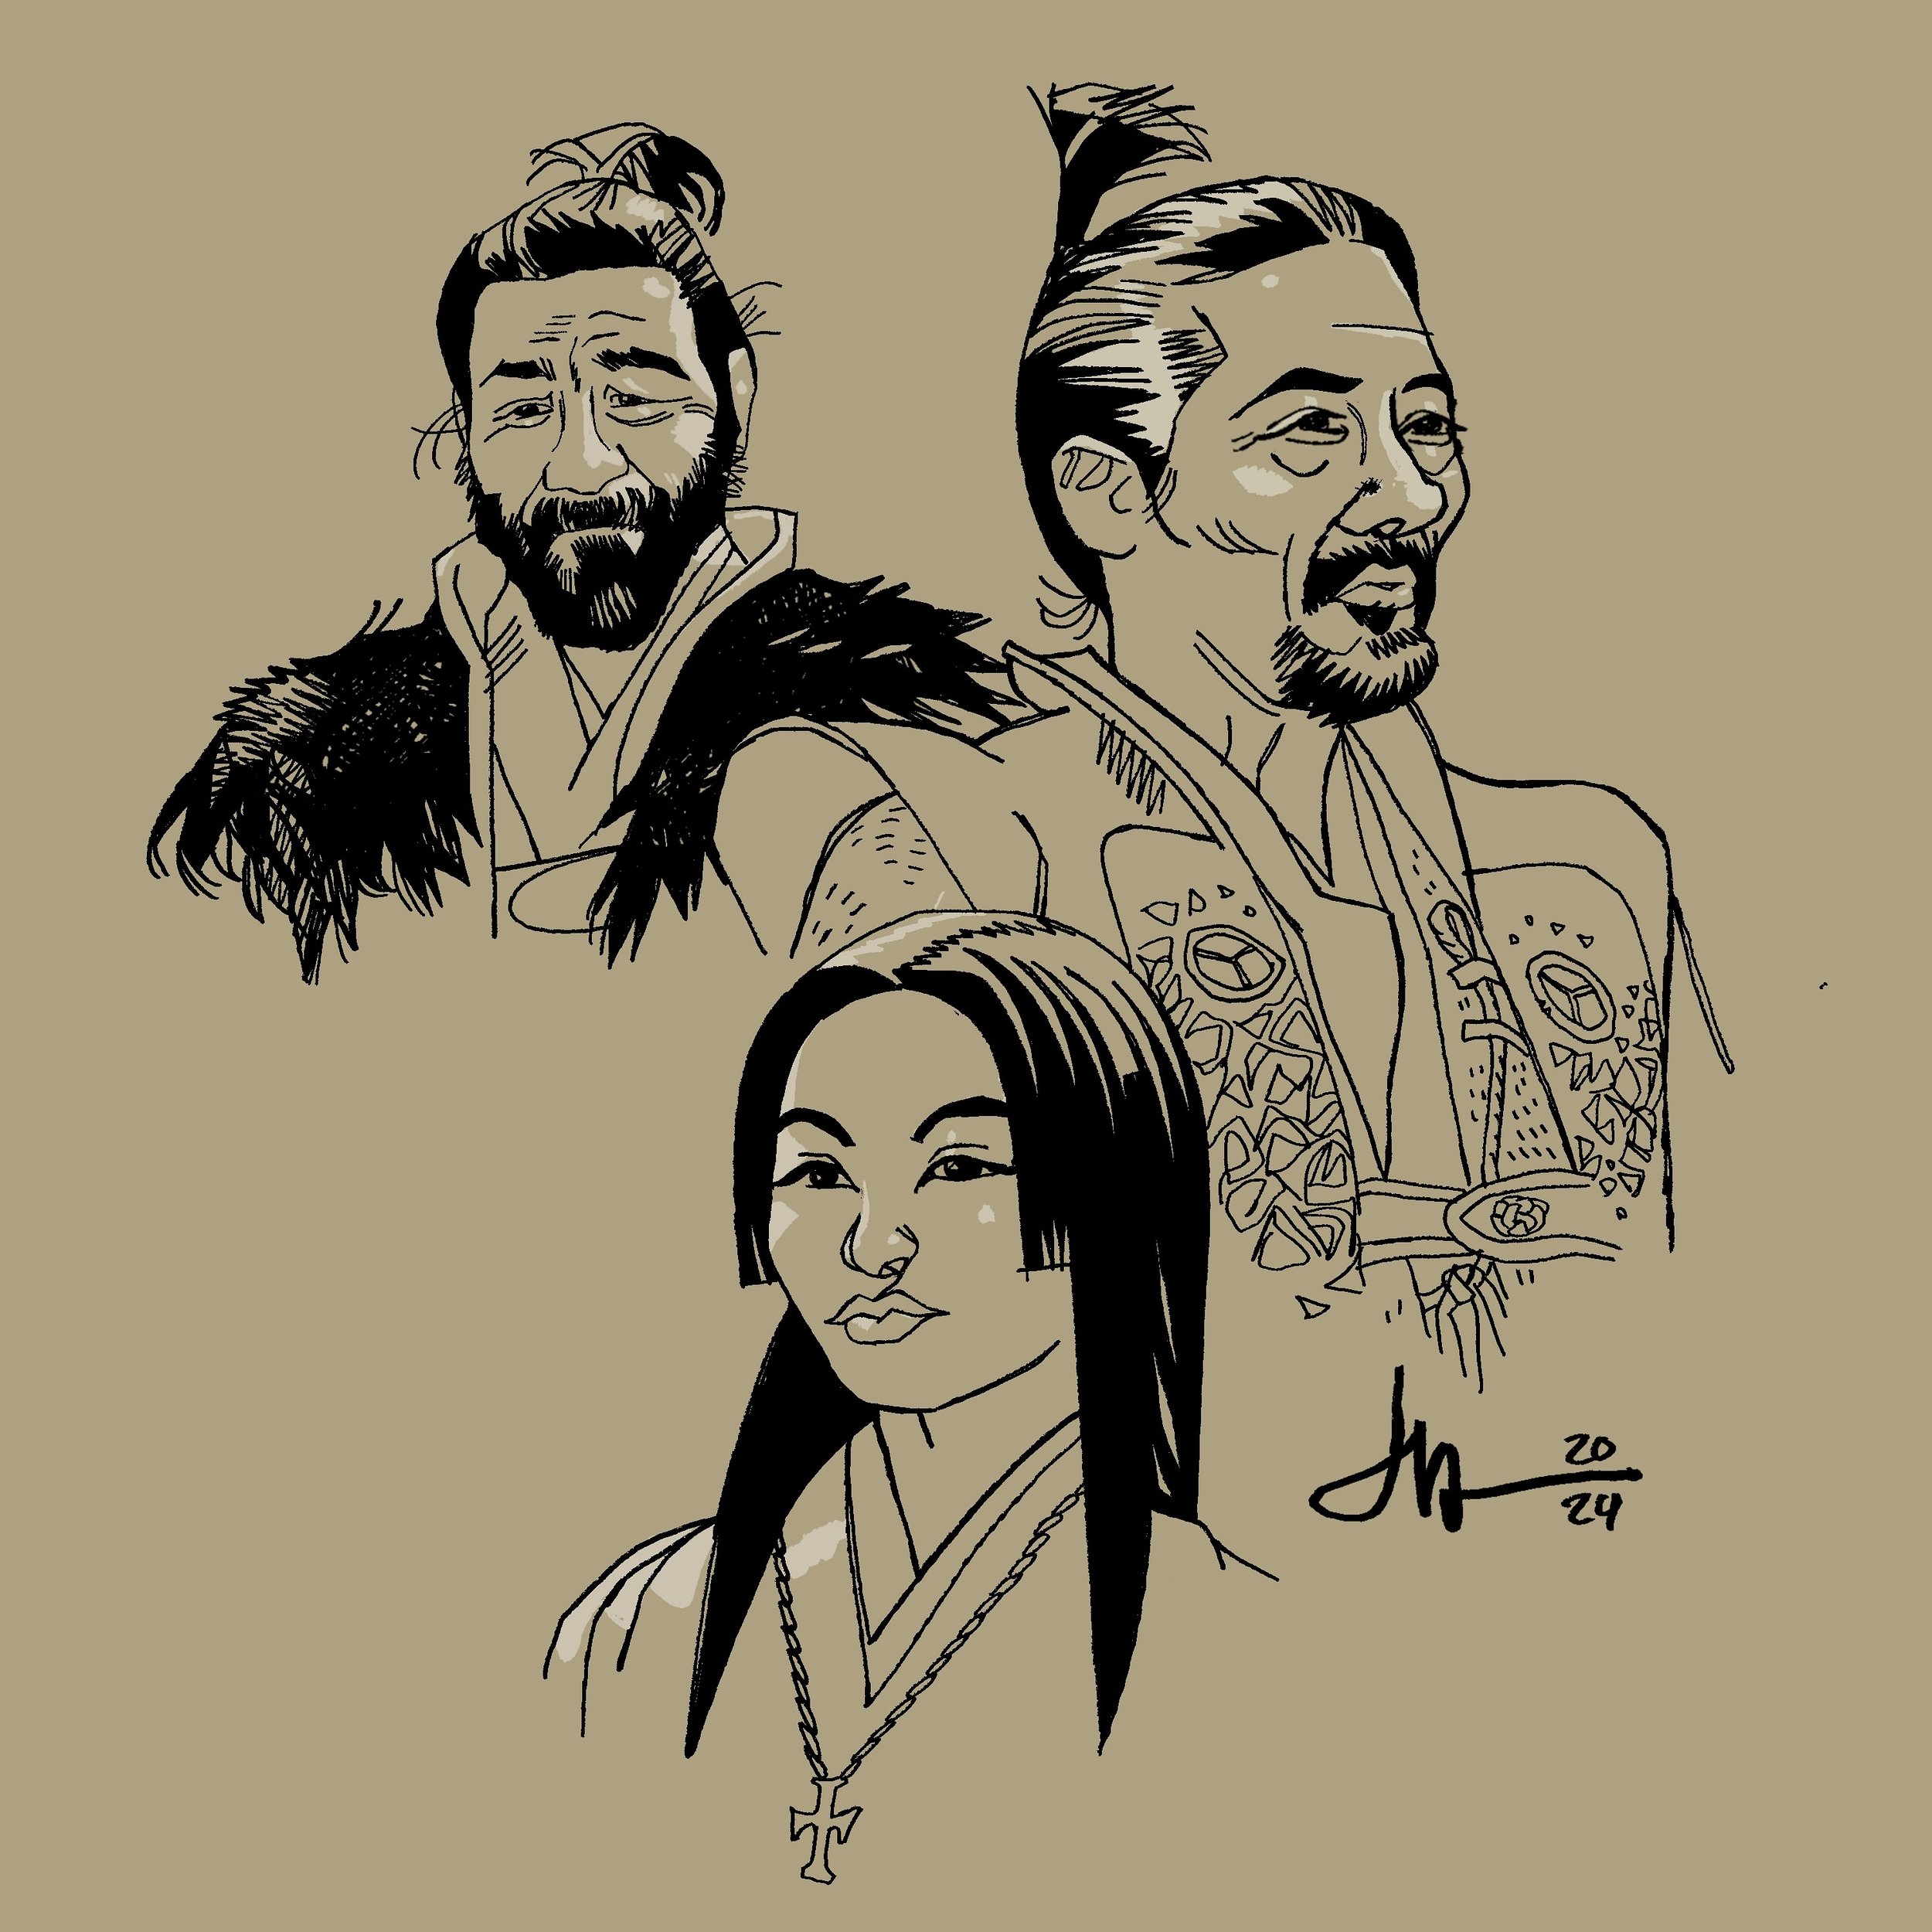 Quick studies from SHOGUN on FX. Are you watching? Don&rsquo;t spoil the finale for me! For comics &amp; more read/join my NEWSLETTER at the link in bio. 

#shogun #fx #comics #comicbooks #caricature #lifedrawing